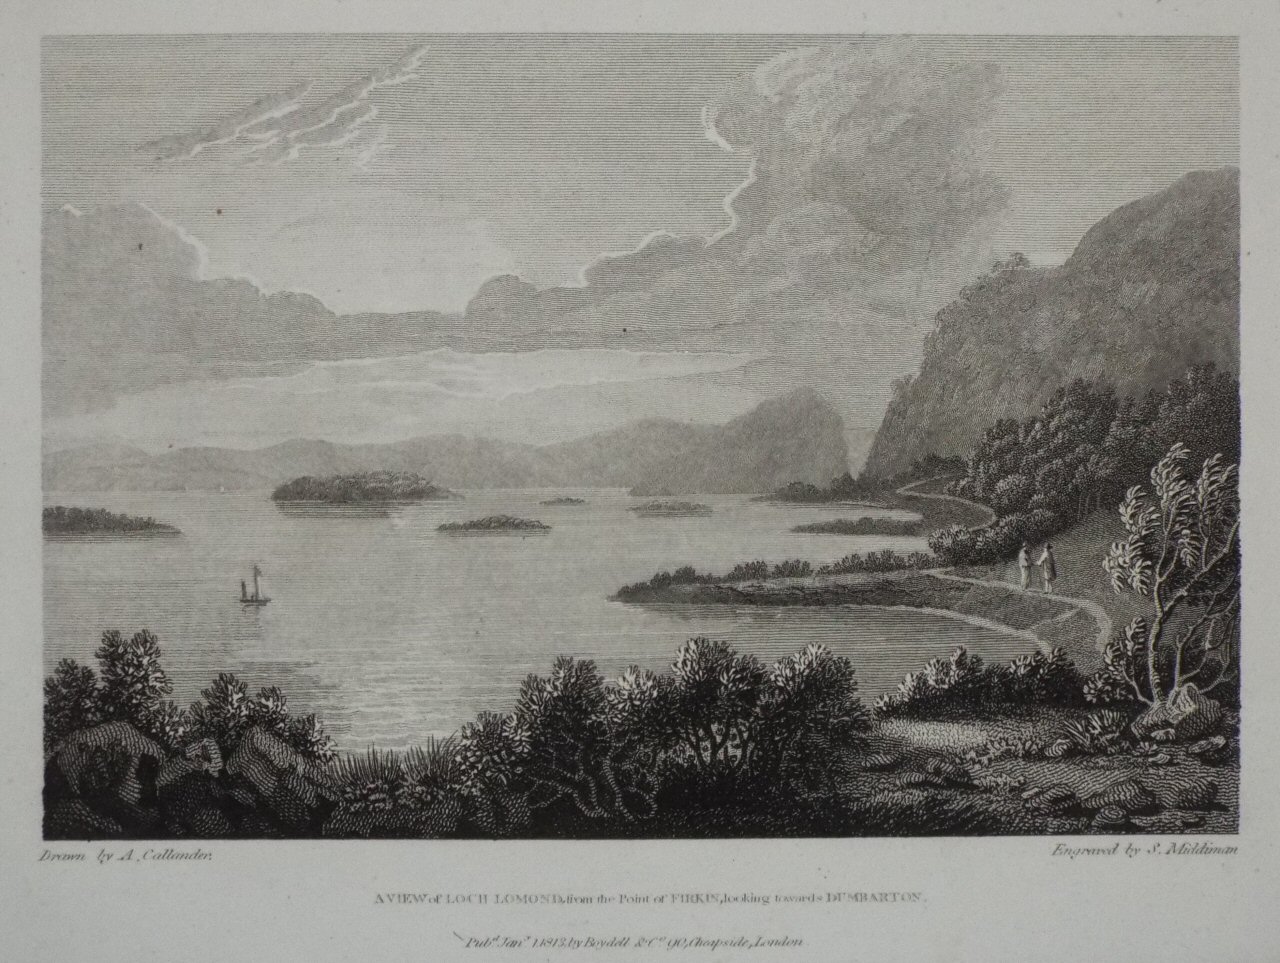 Print - A View of Loch Lomond, from the Point of Firkin, looking towards Dumbarton. - Middiman